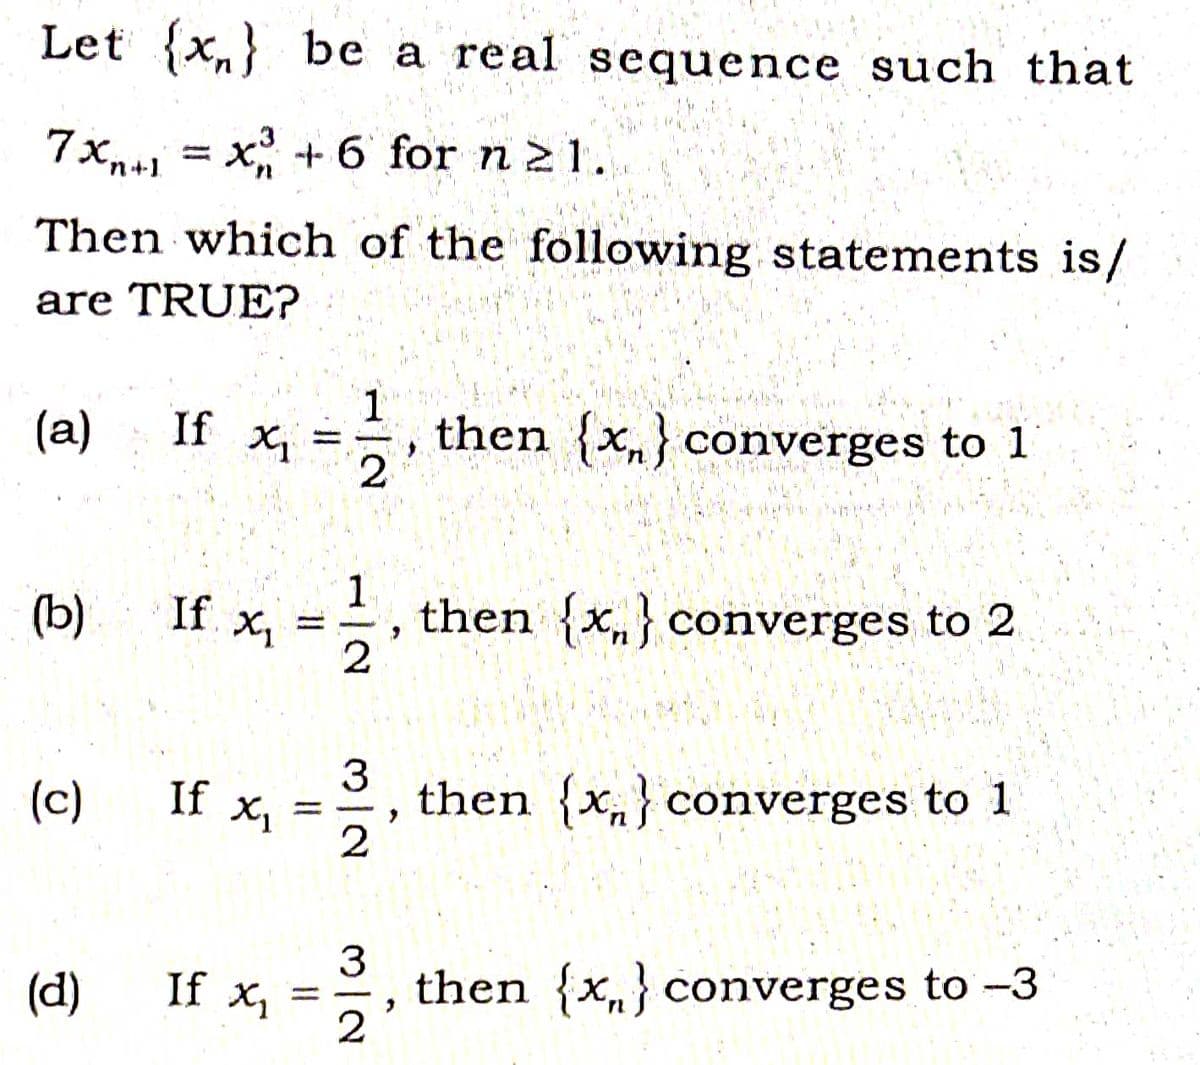 Let {x,} be a real sequence such that
7Xn+1 = x +6 for n 21.
Then which of the following statements is/
are TRUE?
(a)
If X1
1
then {x,} converges to 1
(b)
If x, =
1.
then {x,} converges to 2
(c)
If x,
3
then {x„} converges to 1
3
then {x,} converges to -3
2
(d)
If X1
